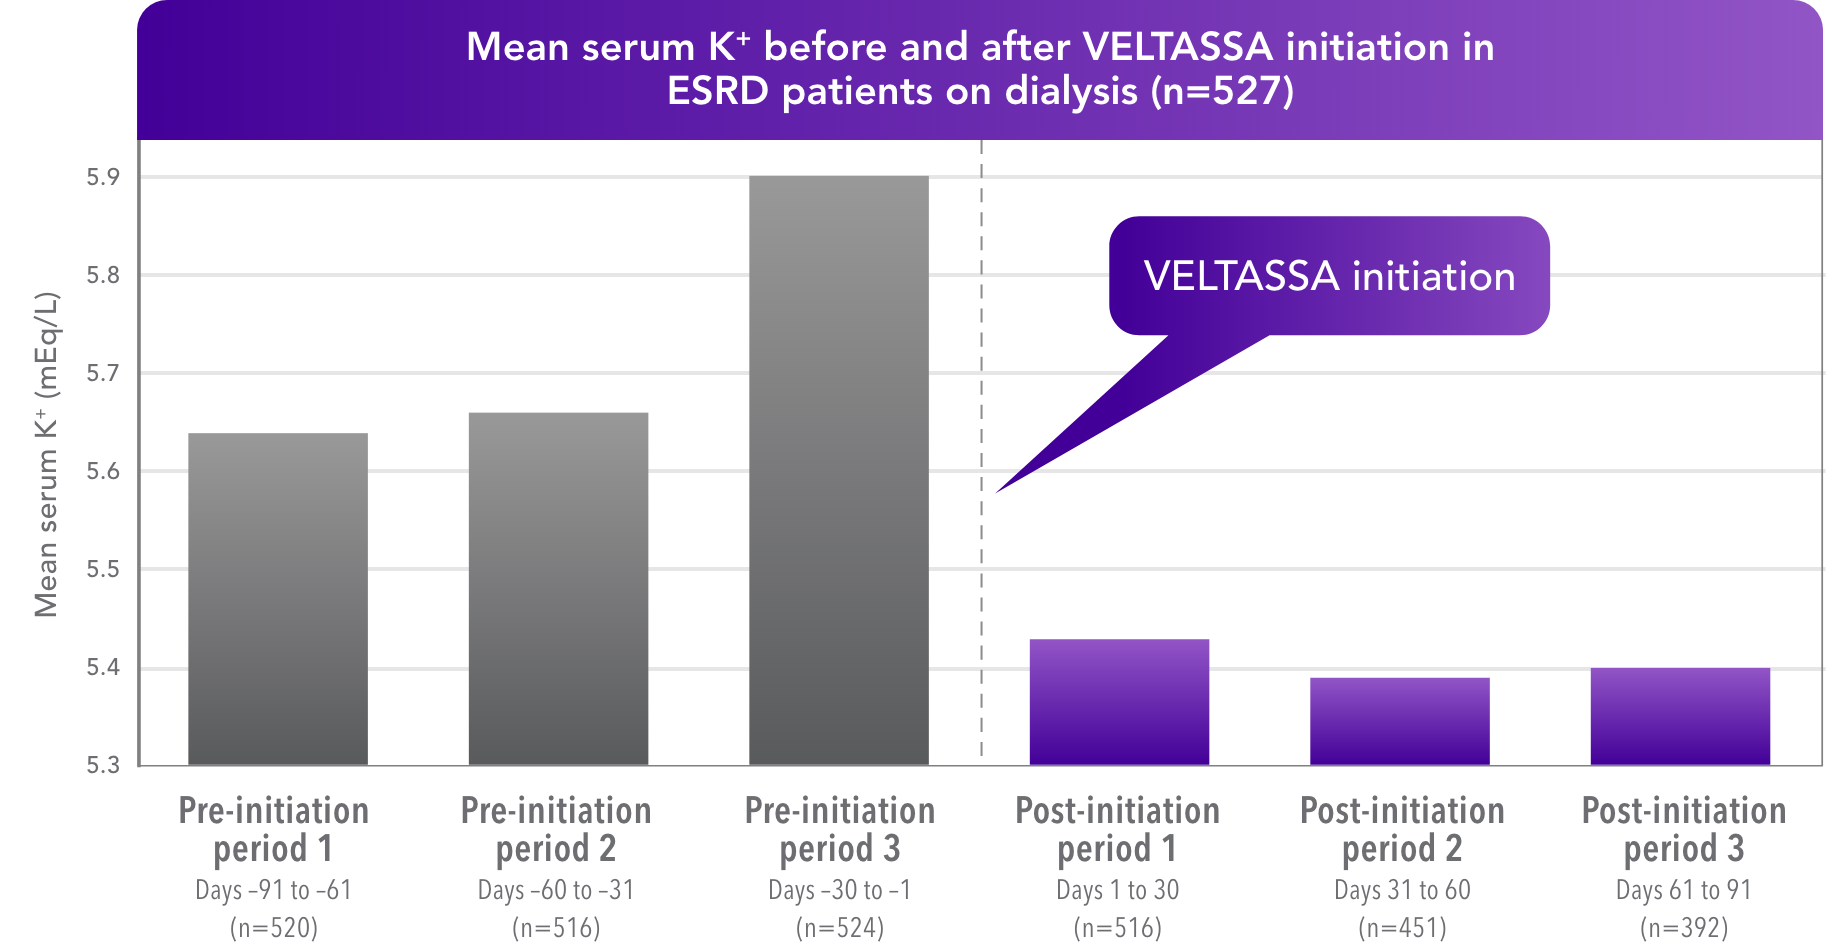 Results of a real-world study of dialysis patients showed reductions in serum potassium after VELTASSA initiation.